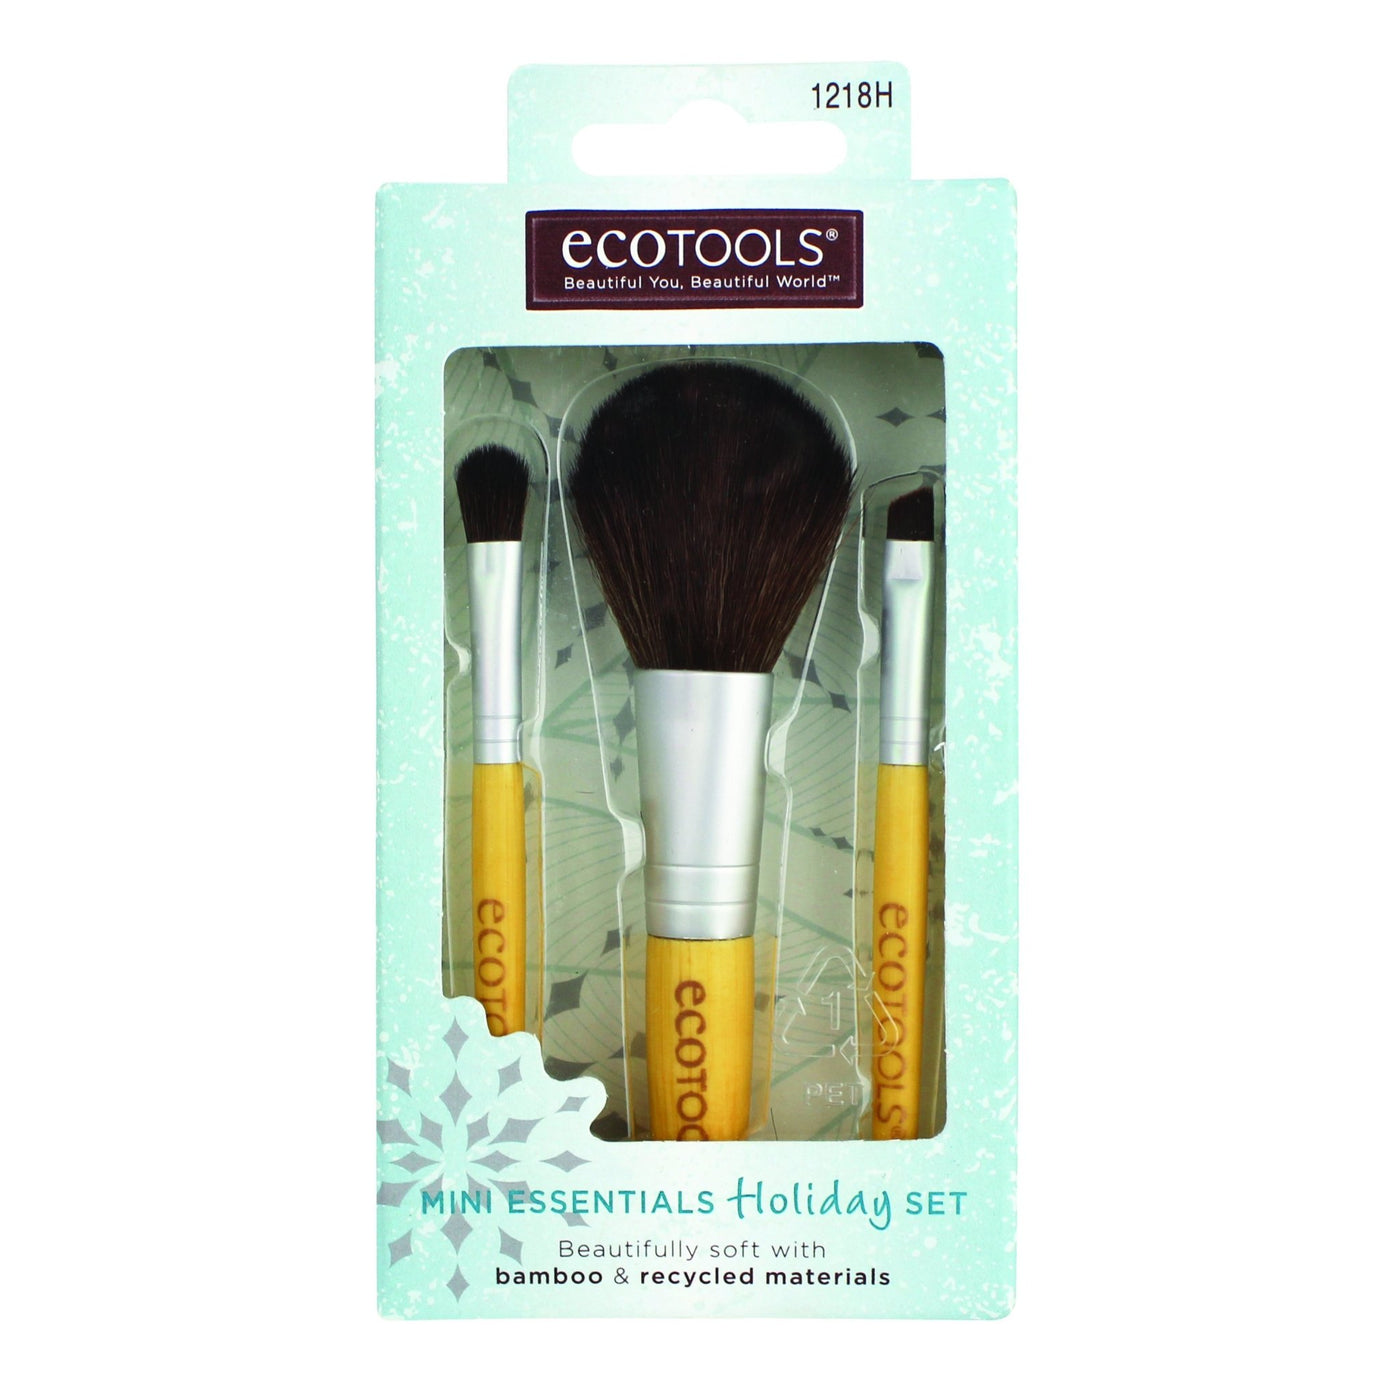 EcoTools Mini Essential Holiday Brush Set with Face, Shadow, Liner Brushes - Hey Sara